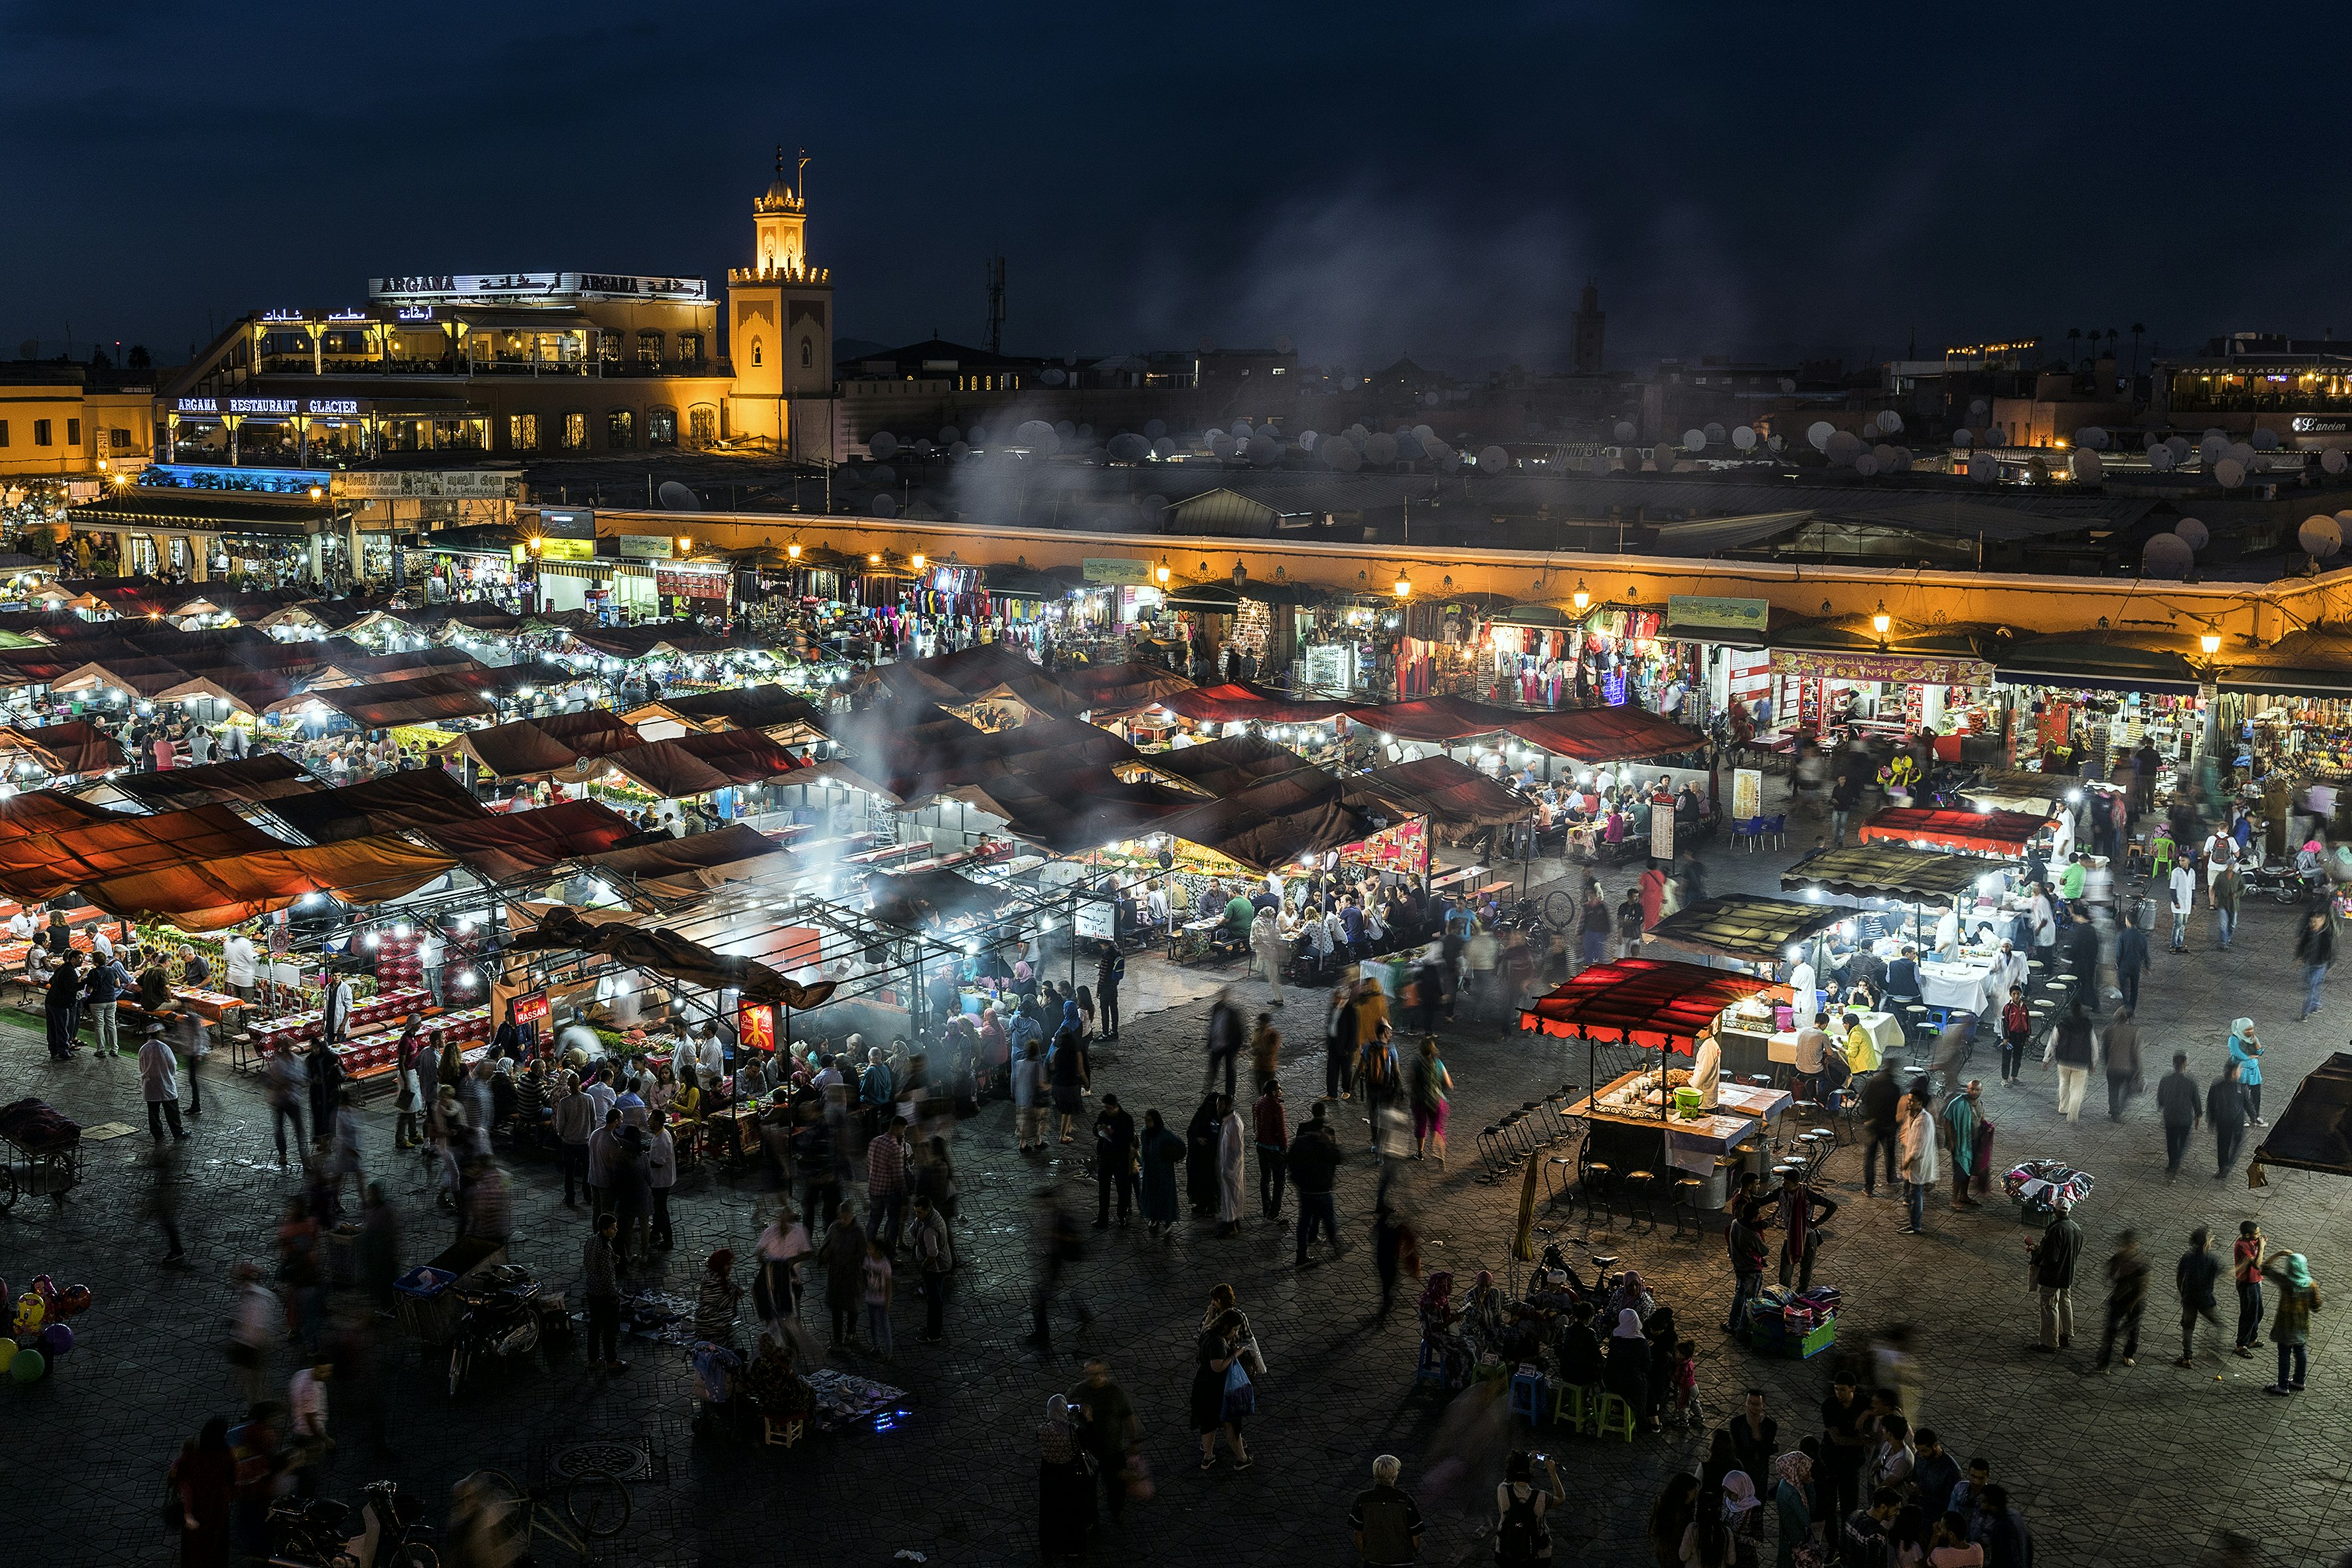 An aerial view of Djemaa El Fna, a market square in Morocco, after sundown